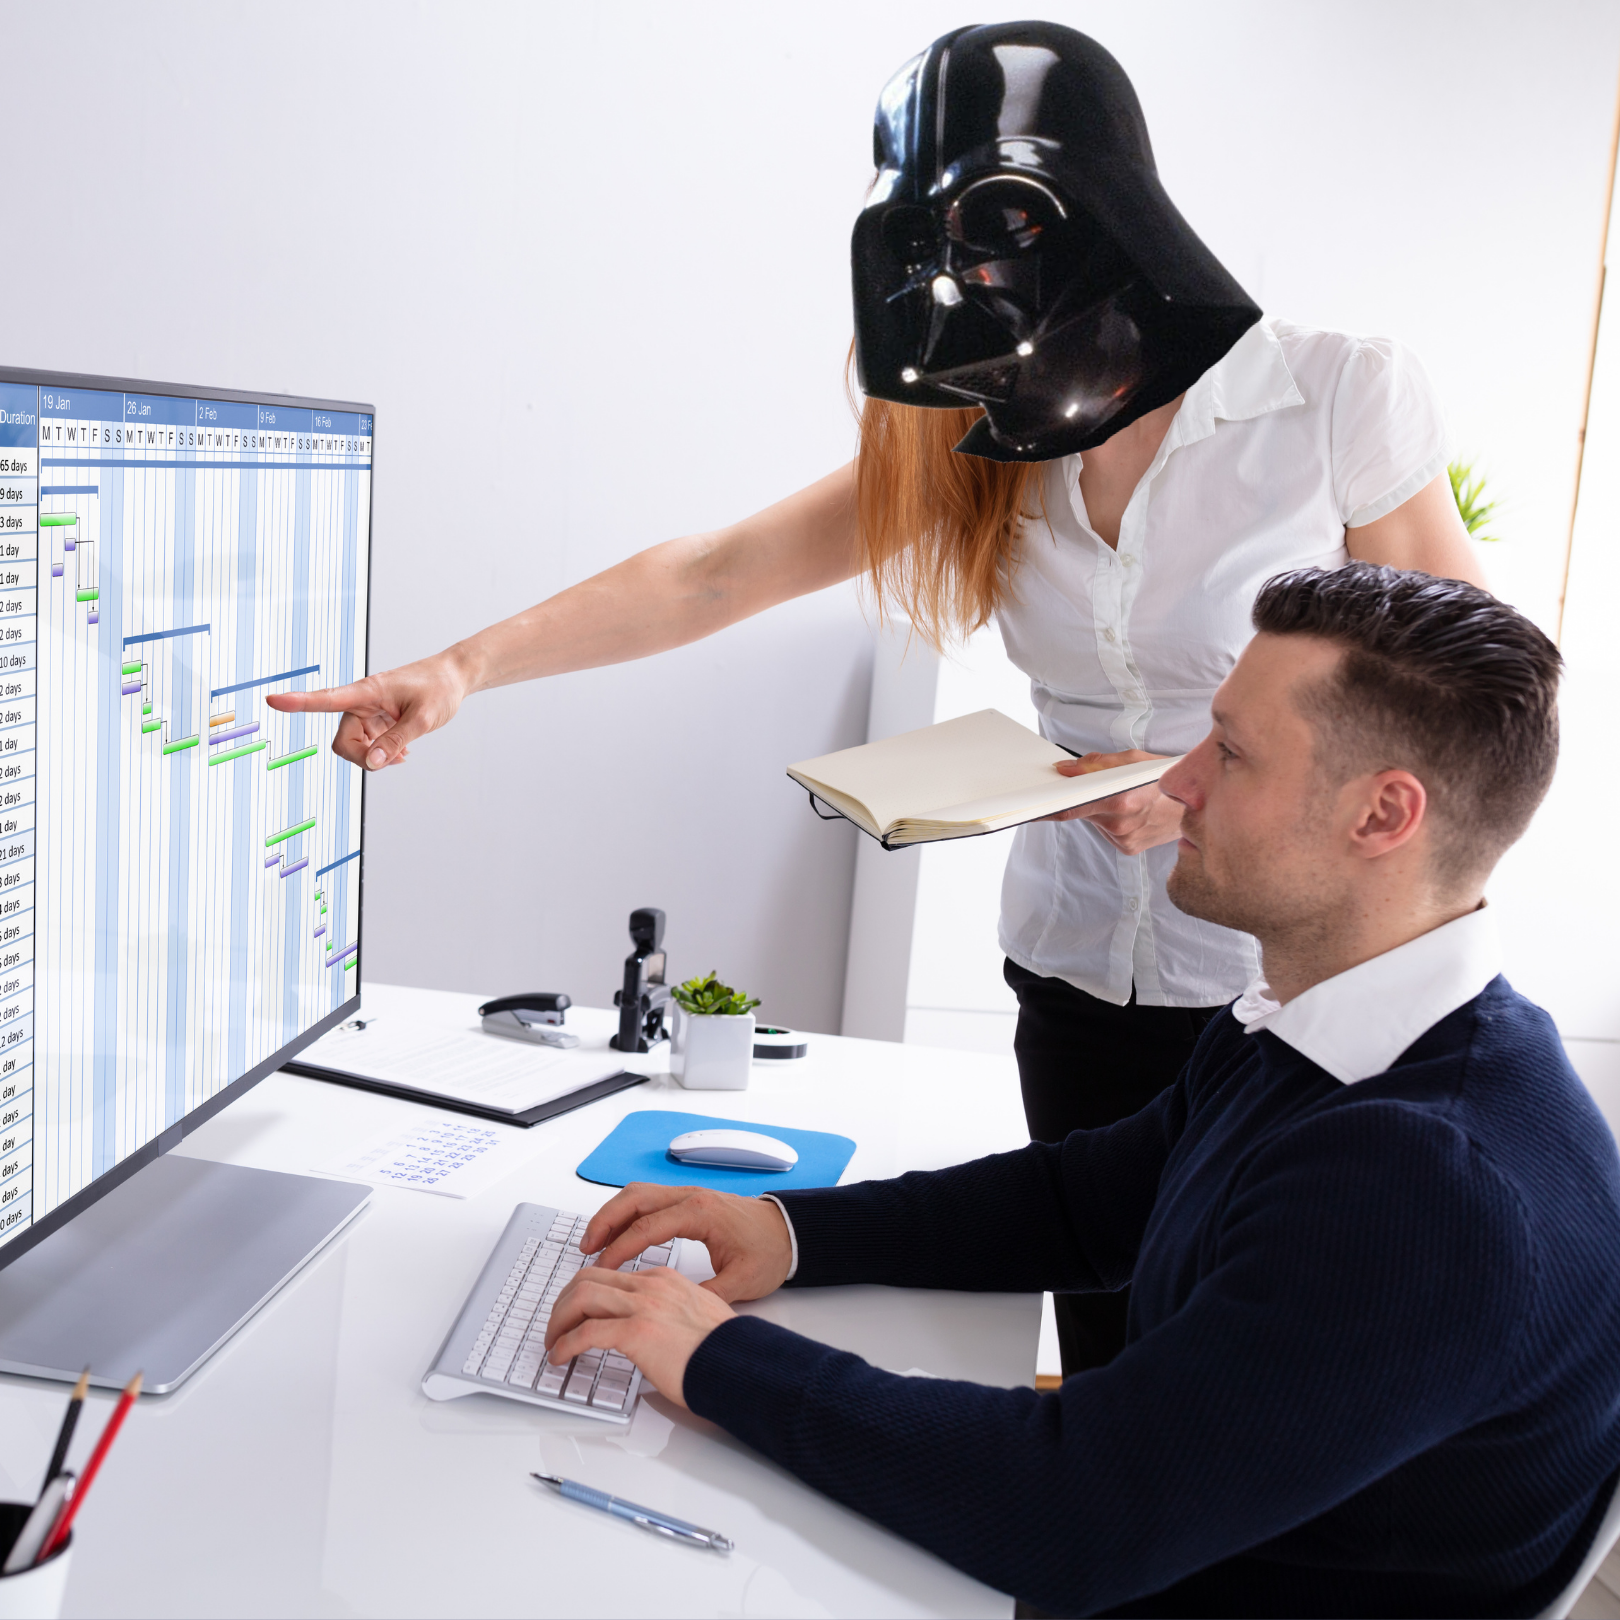 Is Your Project Manager A Sith Lord? Three Ways To Find Out.